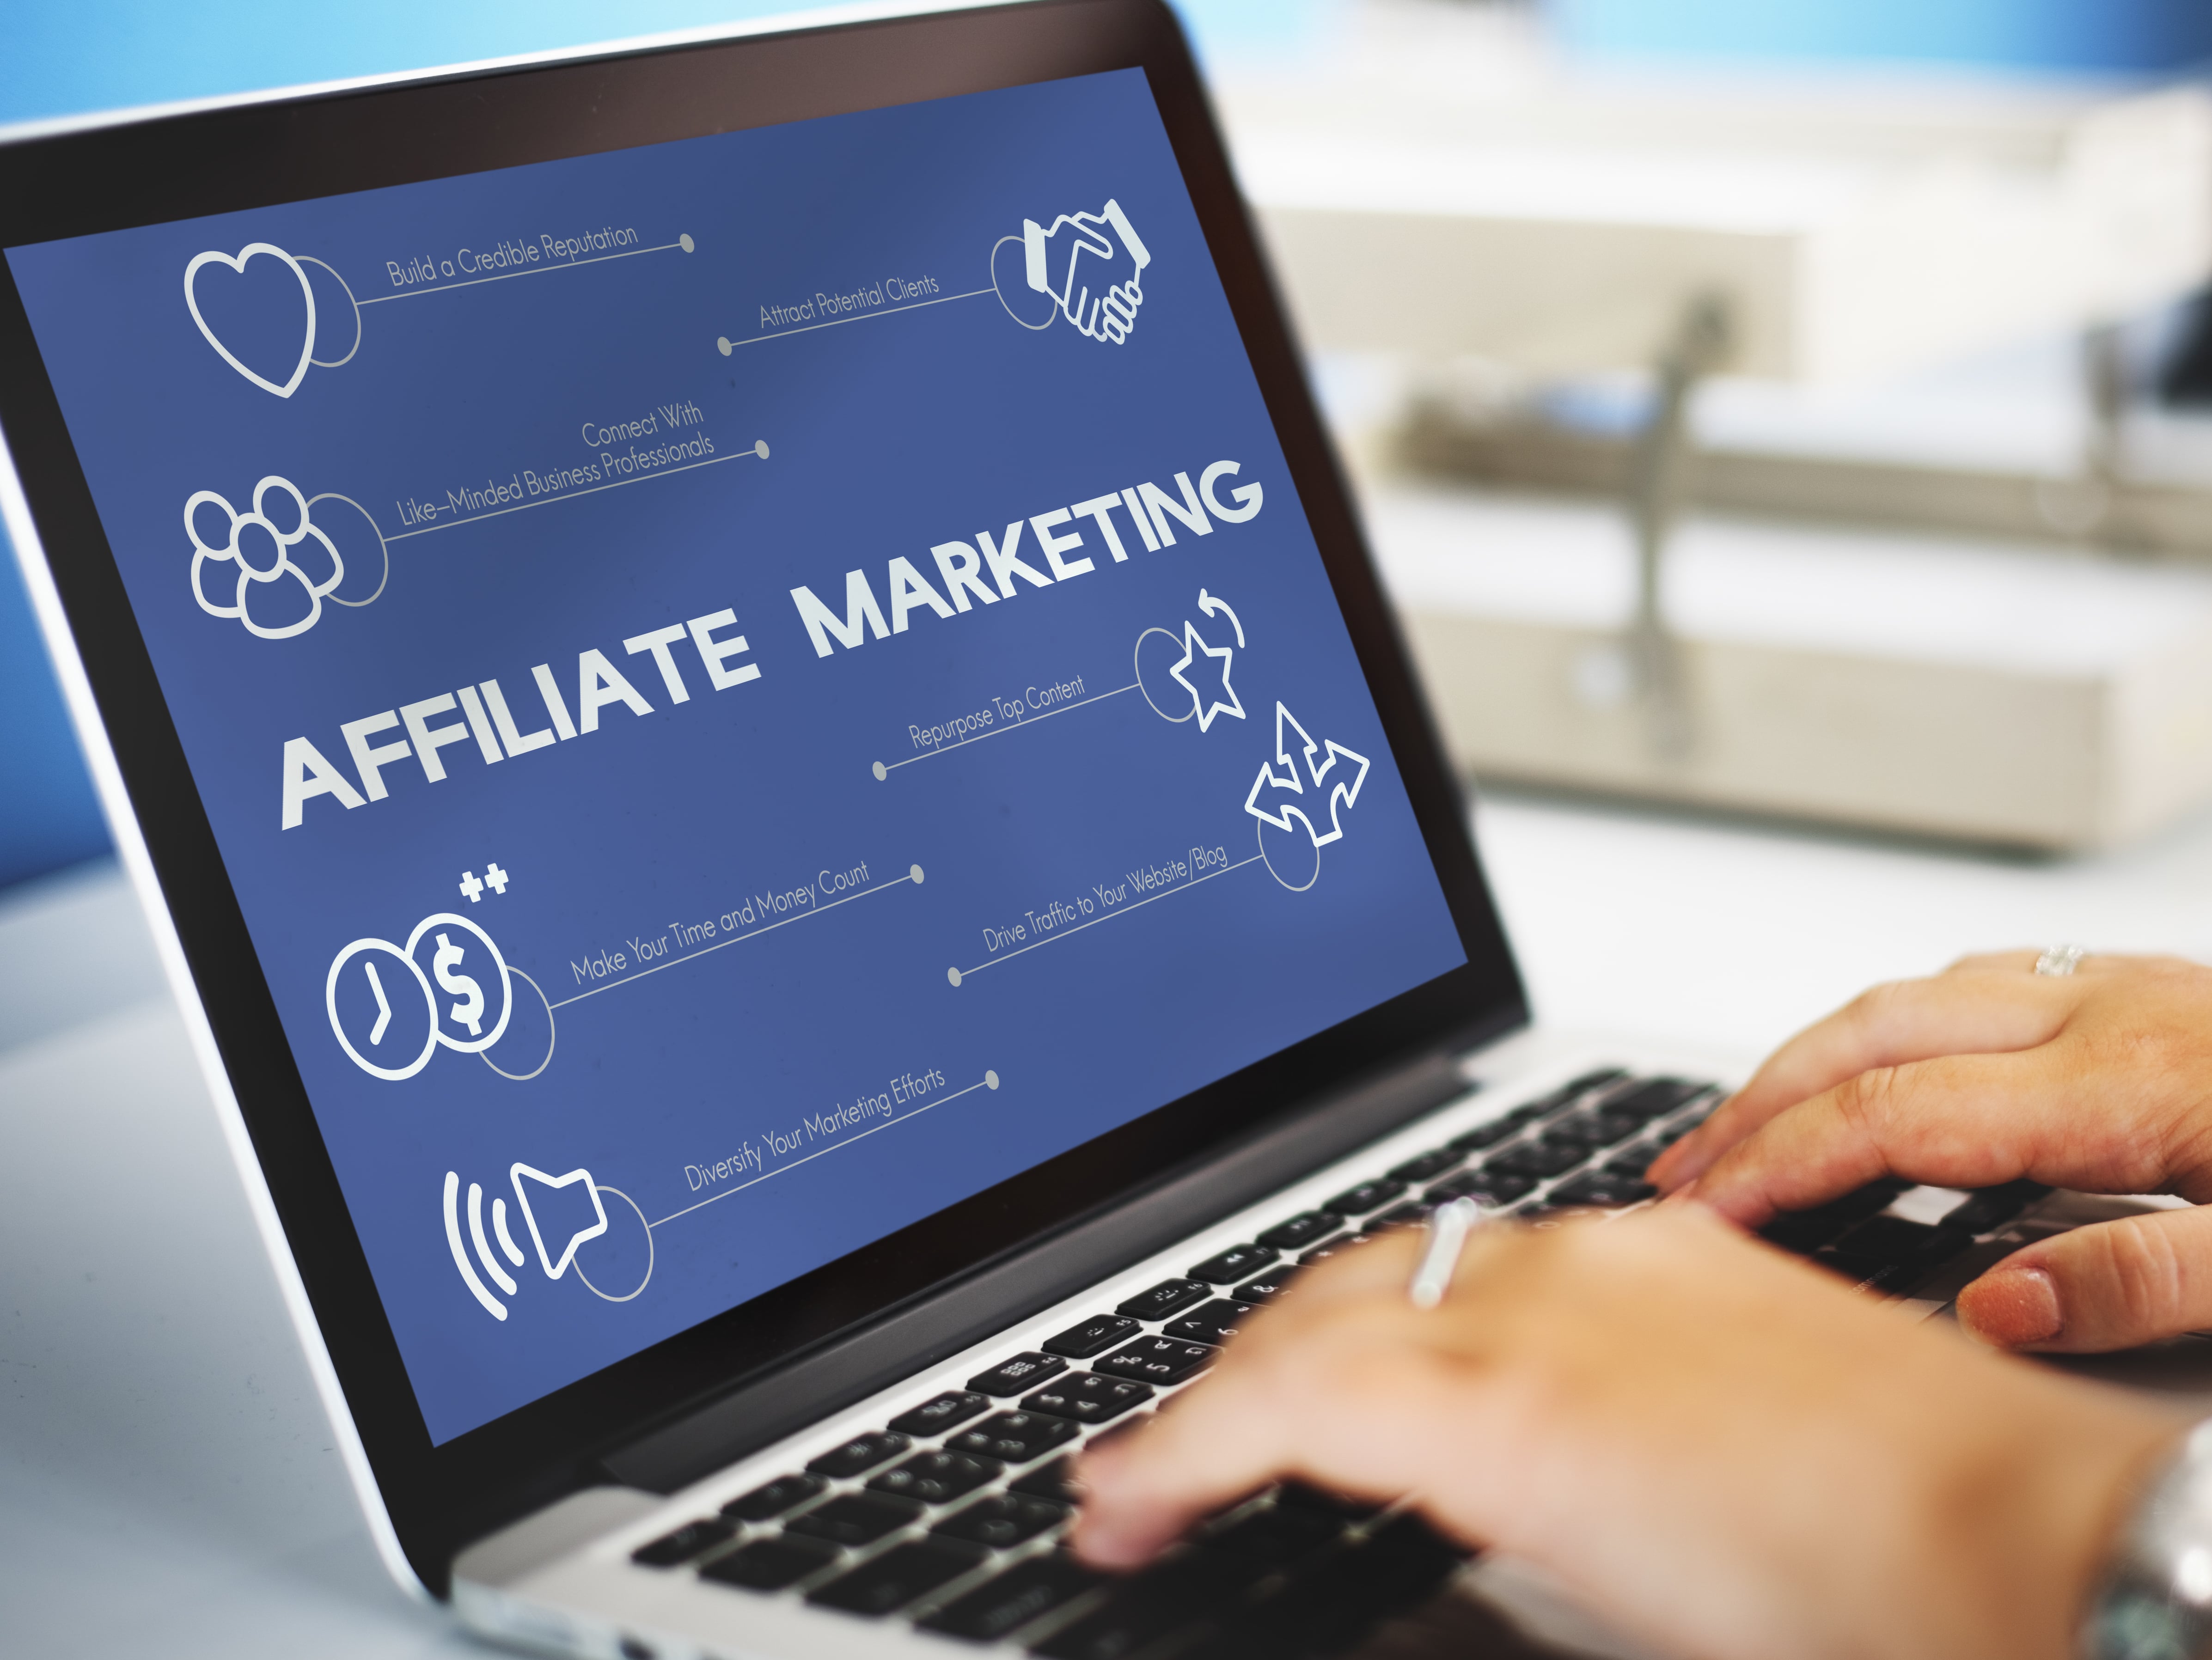 What is Affiliate? Check out the explanation and how it works below.